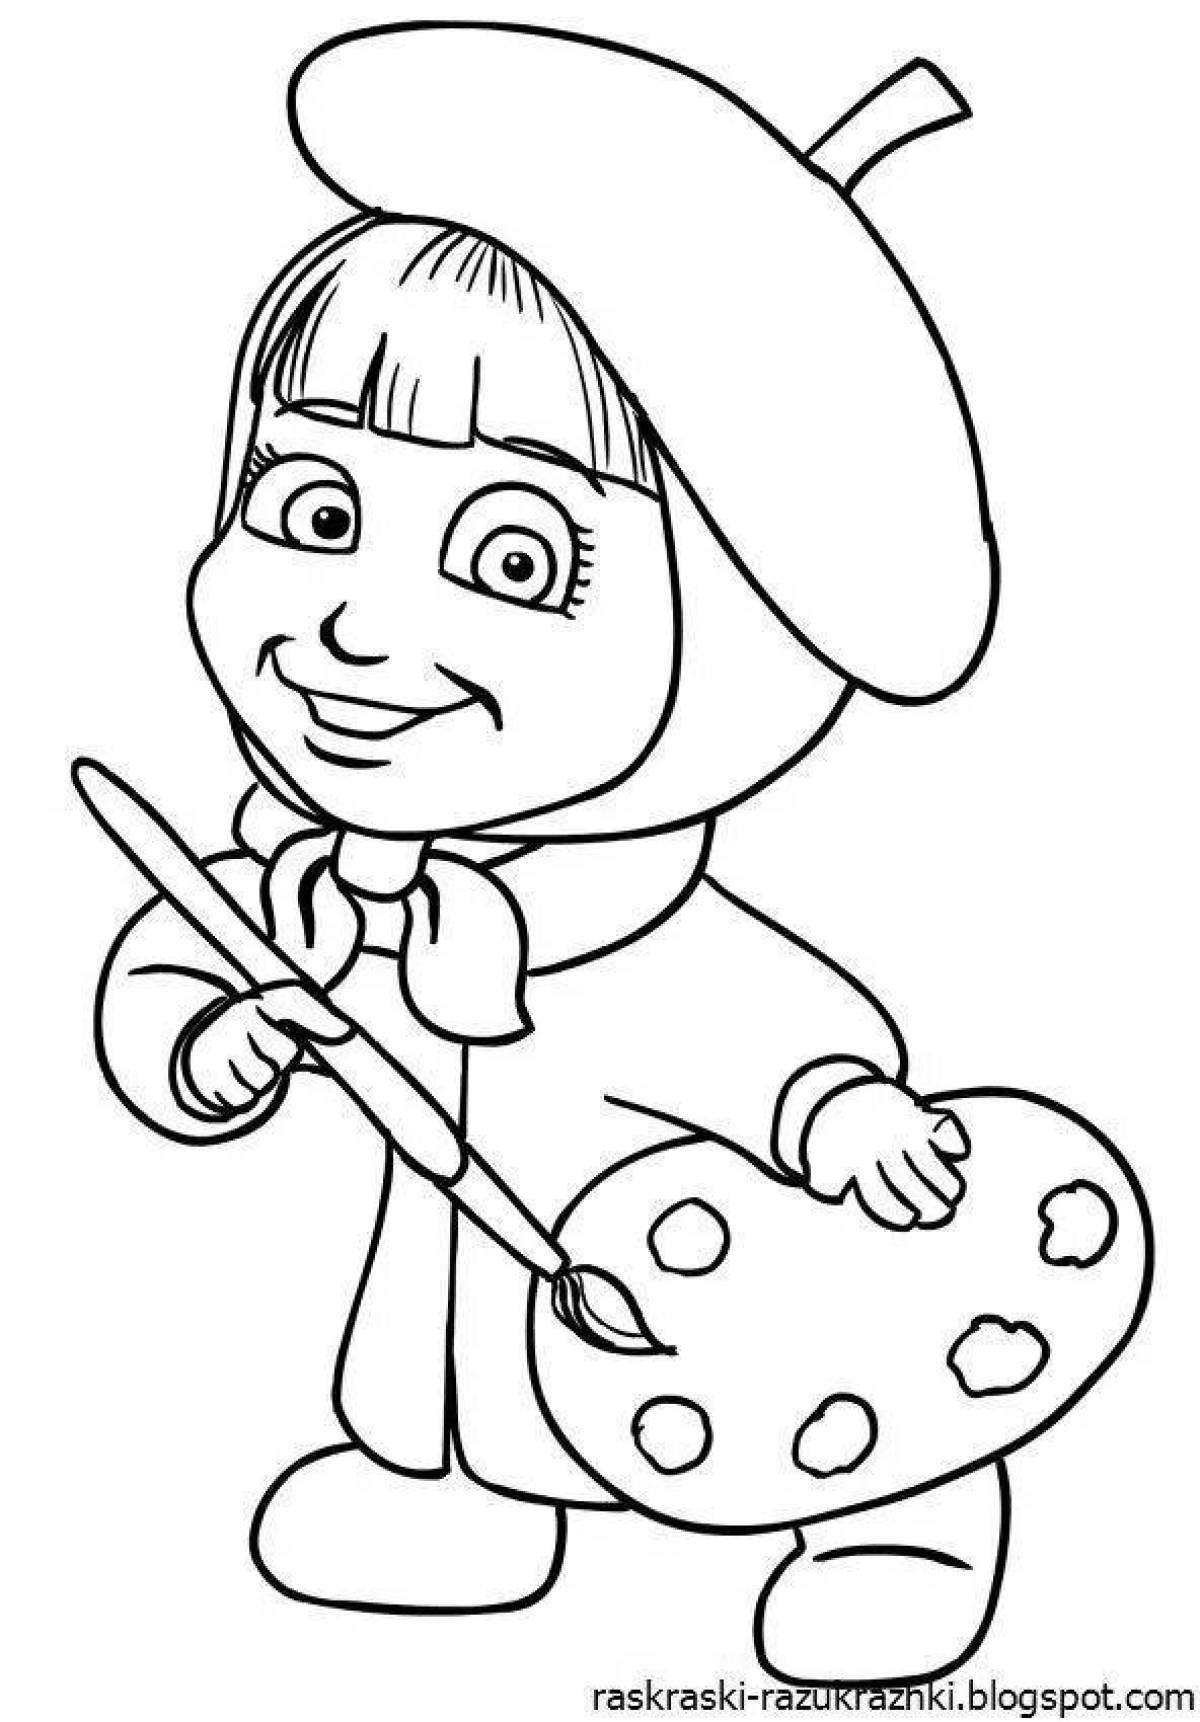 Color-frenzy cartoon coloring pages for children 3-4 years old